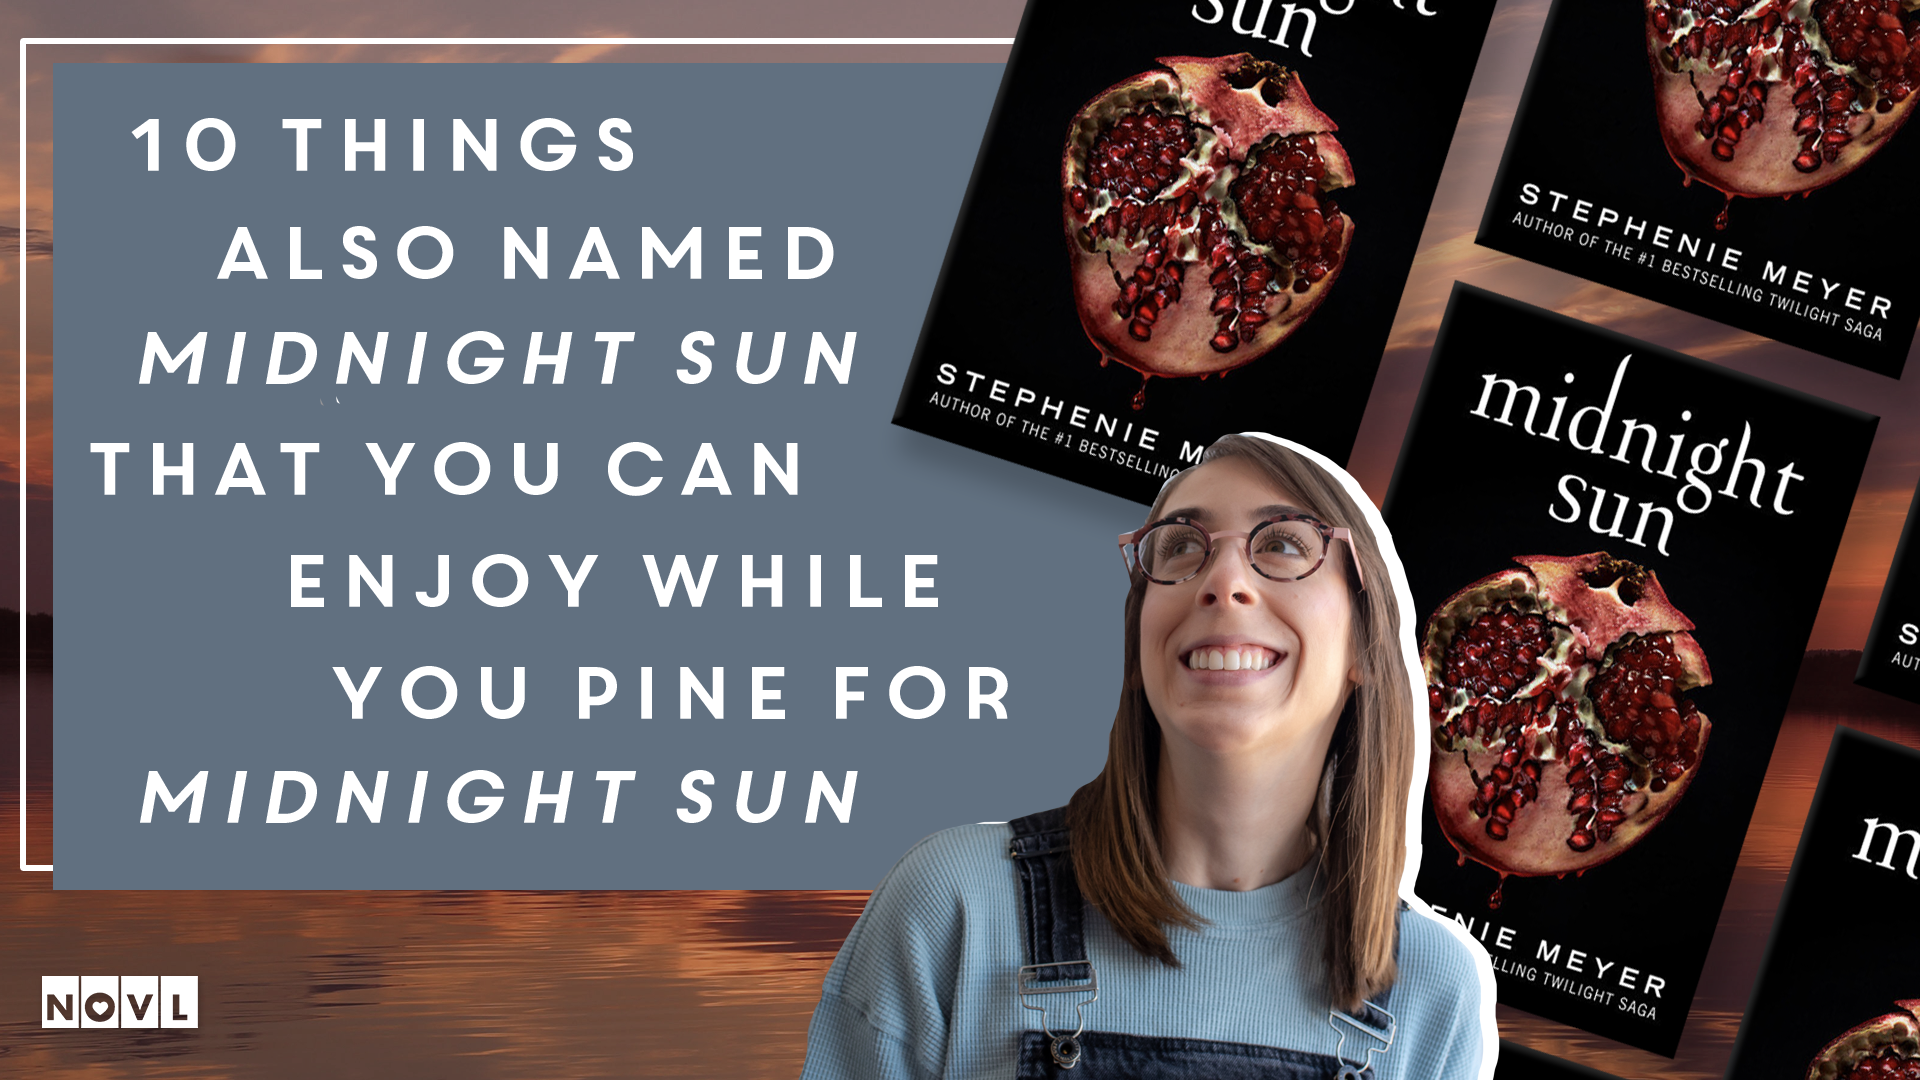 The NOVL Blog, Featured Image for Article: 10 things also named Midnight Sun that you can enjoy while you pine for Midnight Sun